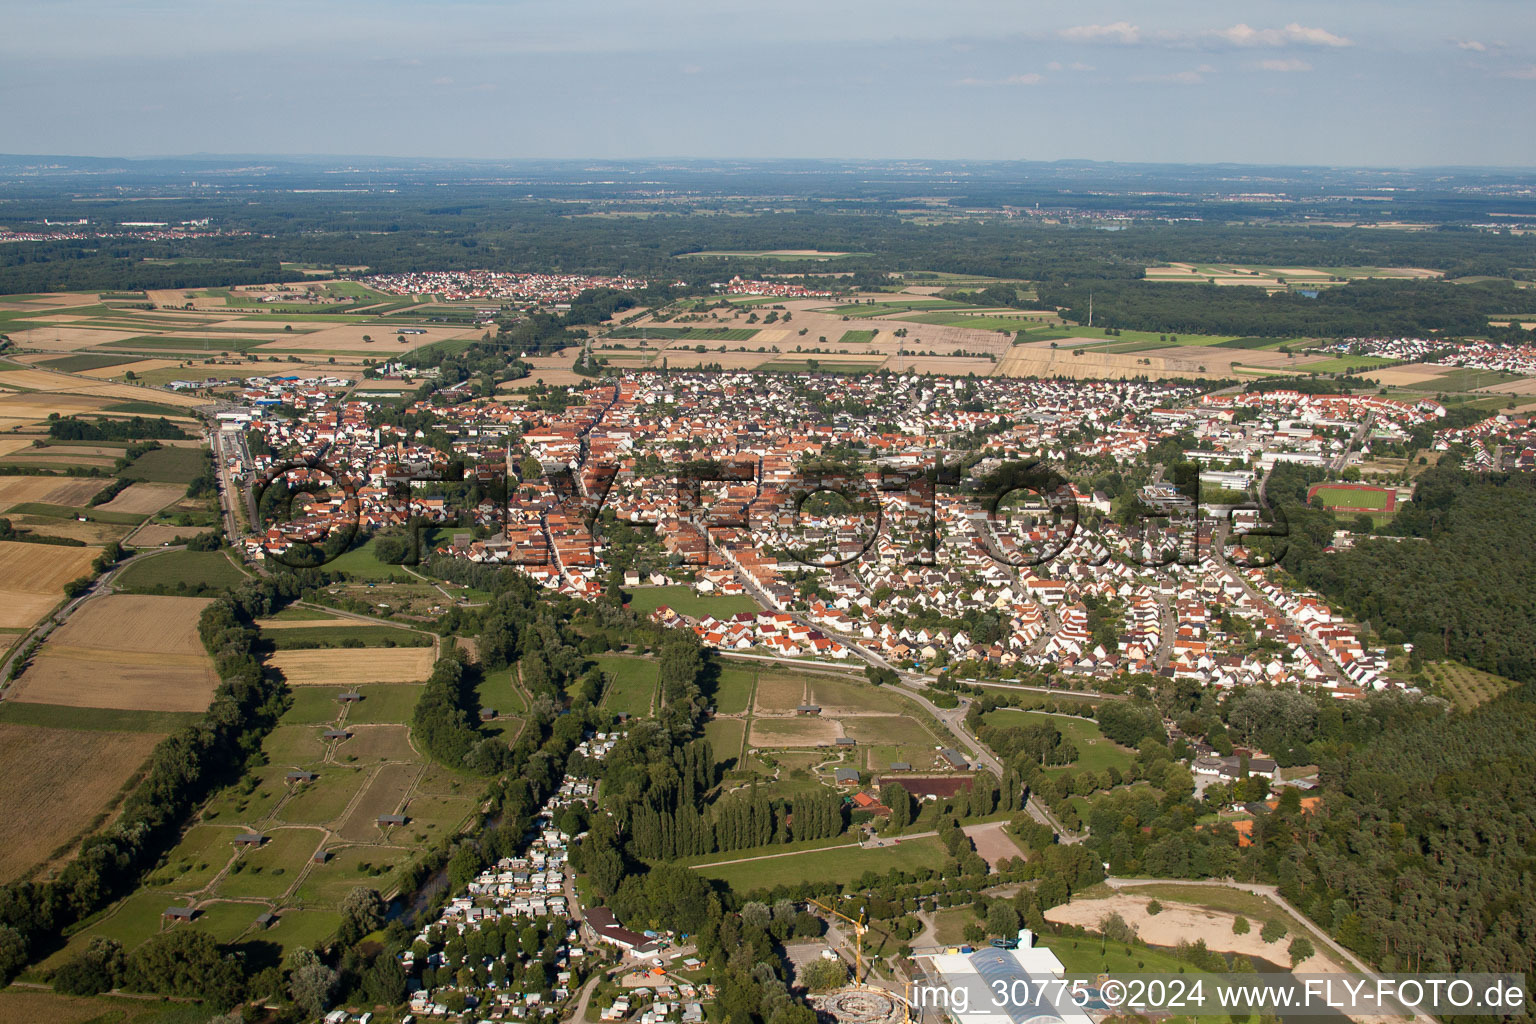 Village - view on the edge of agricultural fields and farmland in Ruelzheim in the state Rhineland-Palatinate, Germany